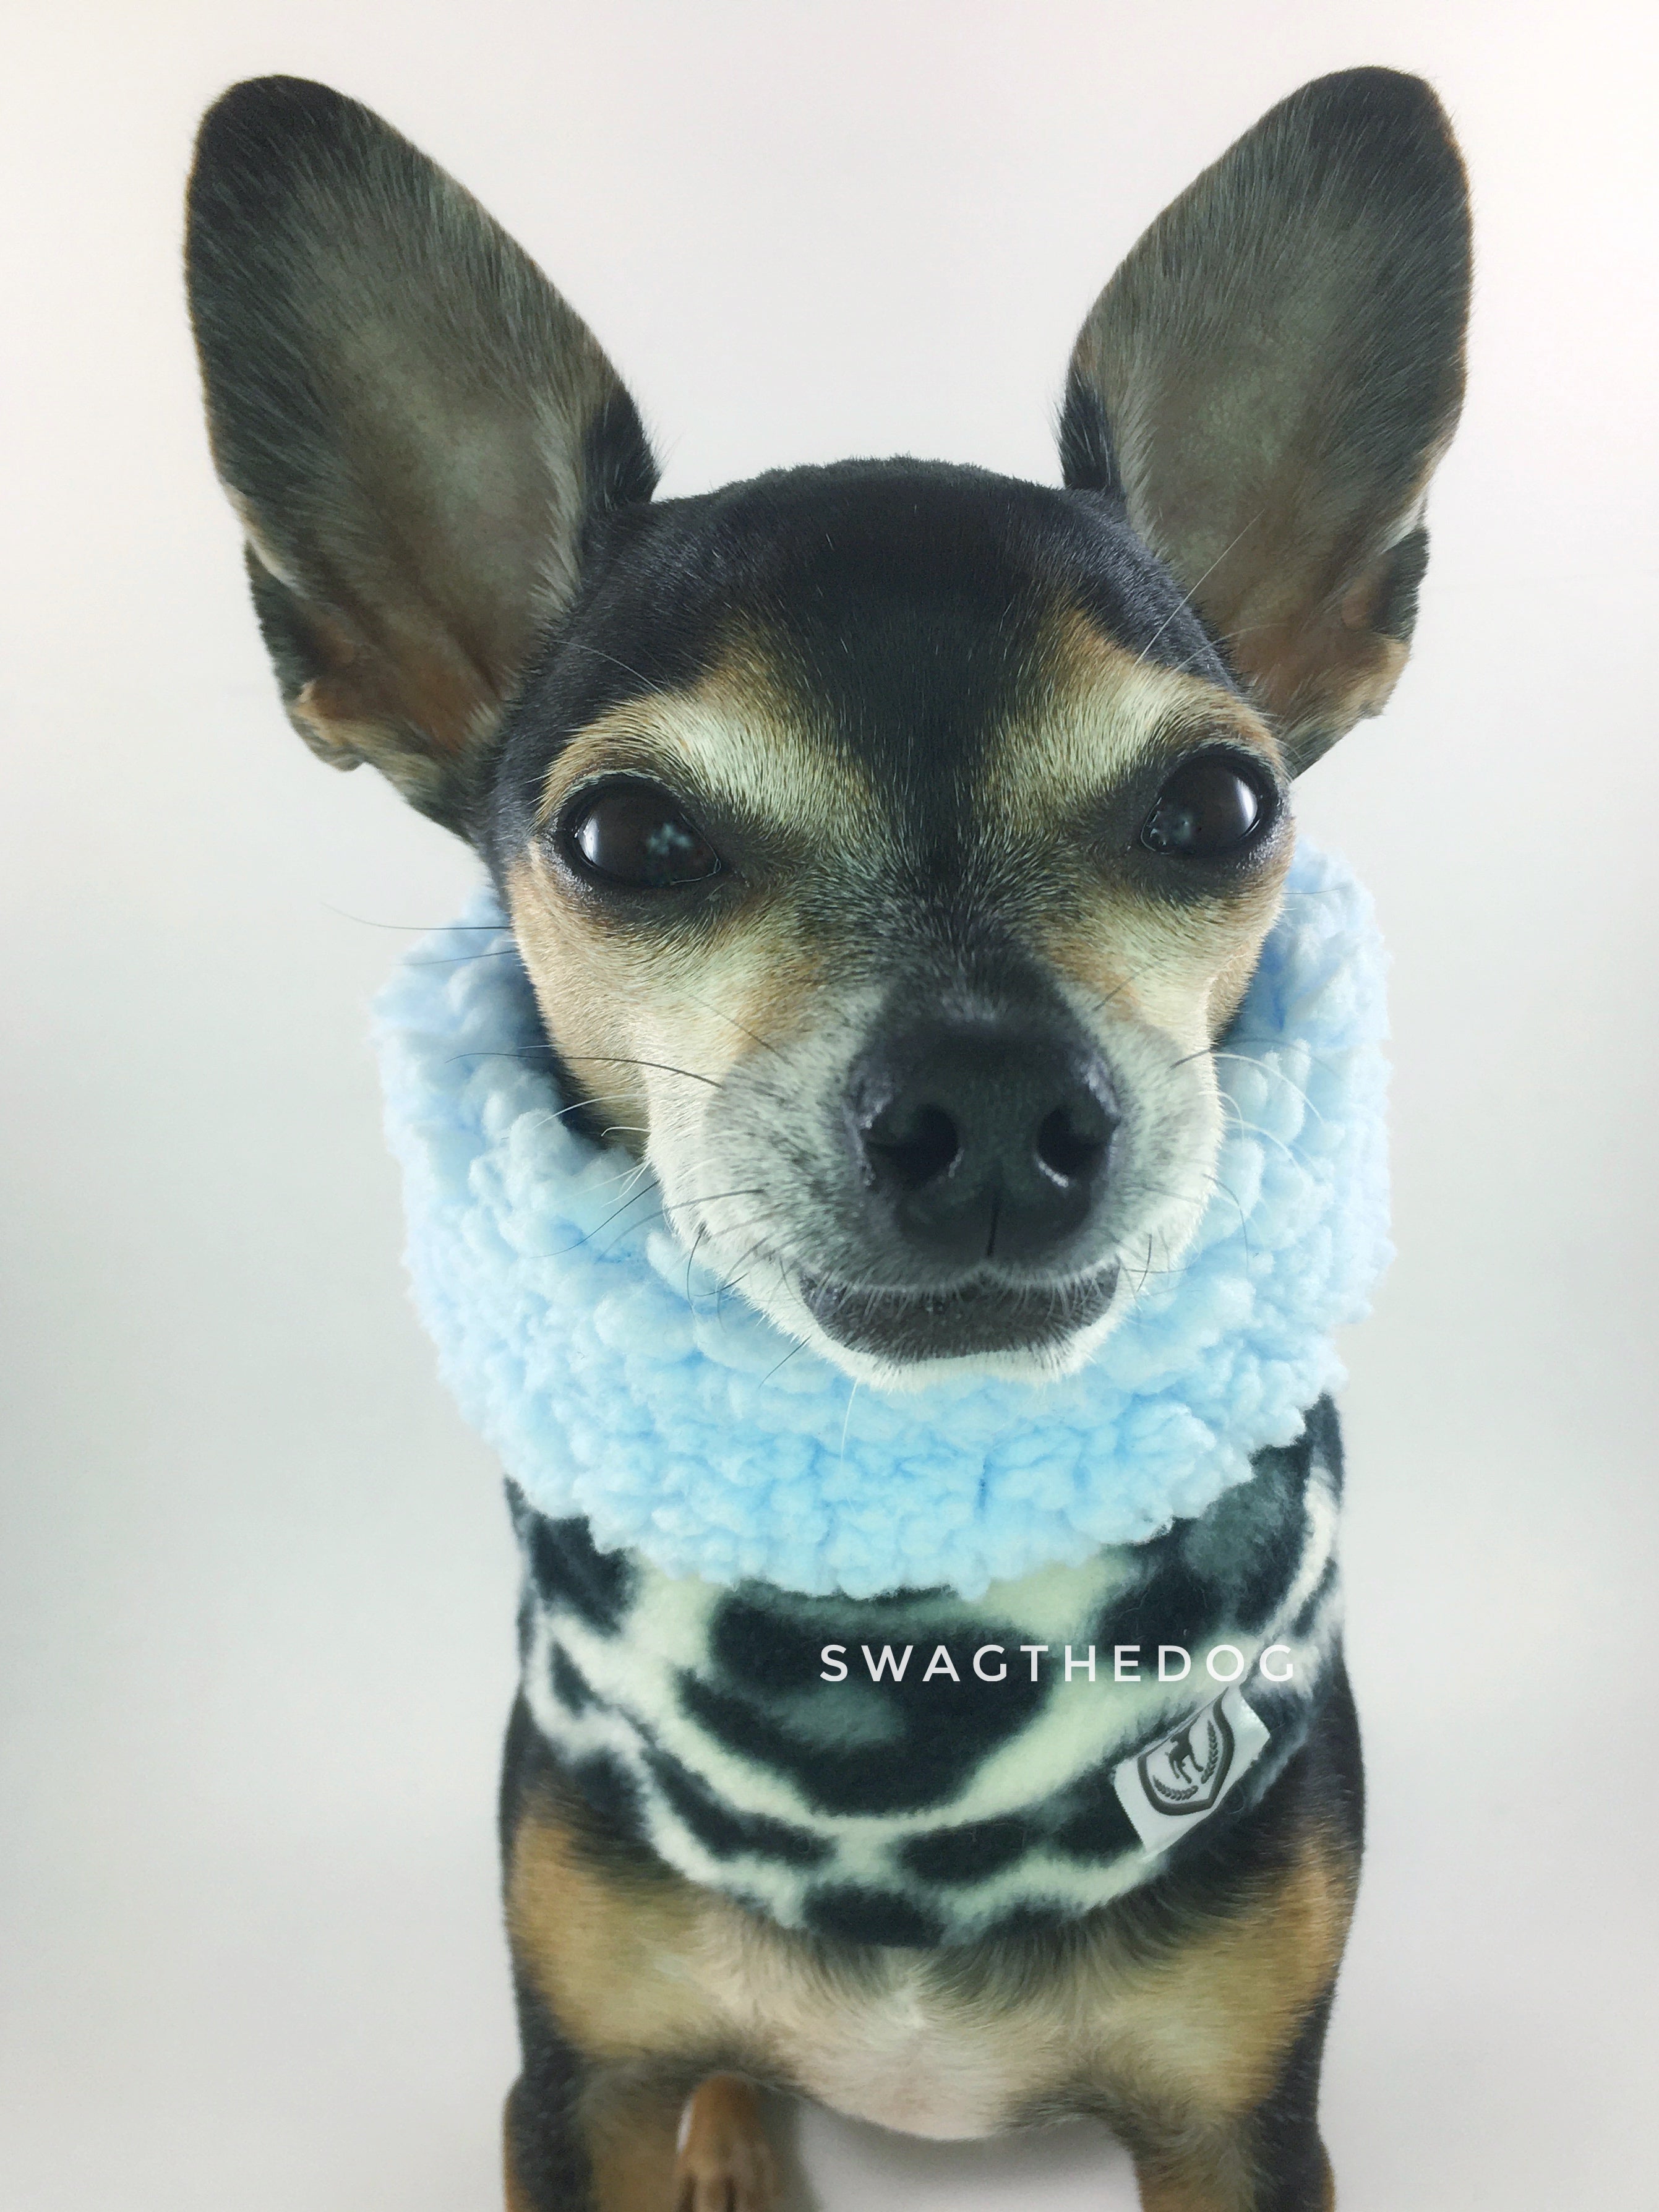 Gray Snow Leopard Swagsnood - Close-up Face View of Hugo, Cute Chihuahua Dog Wearing gray snow leopard print fleece dog snood. Blue sherpa rolled up 1/3 of the snood and 2/3 with gray snow leopard print fleece